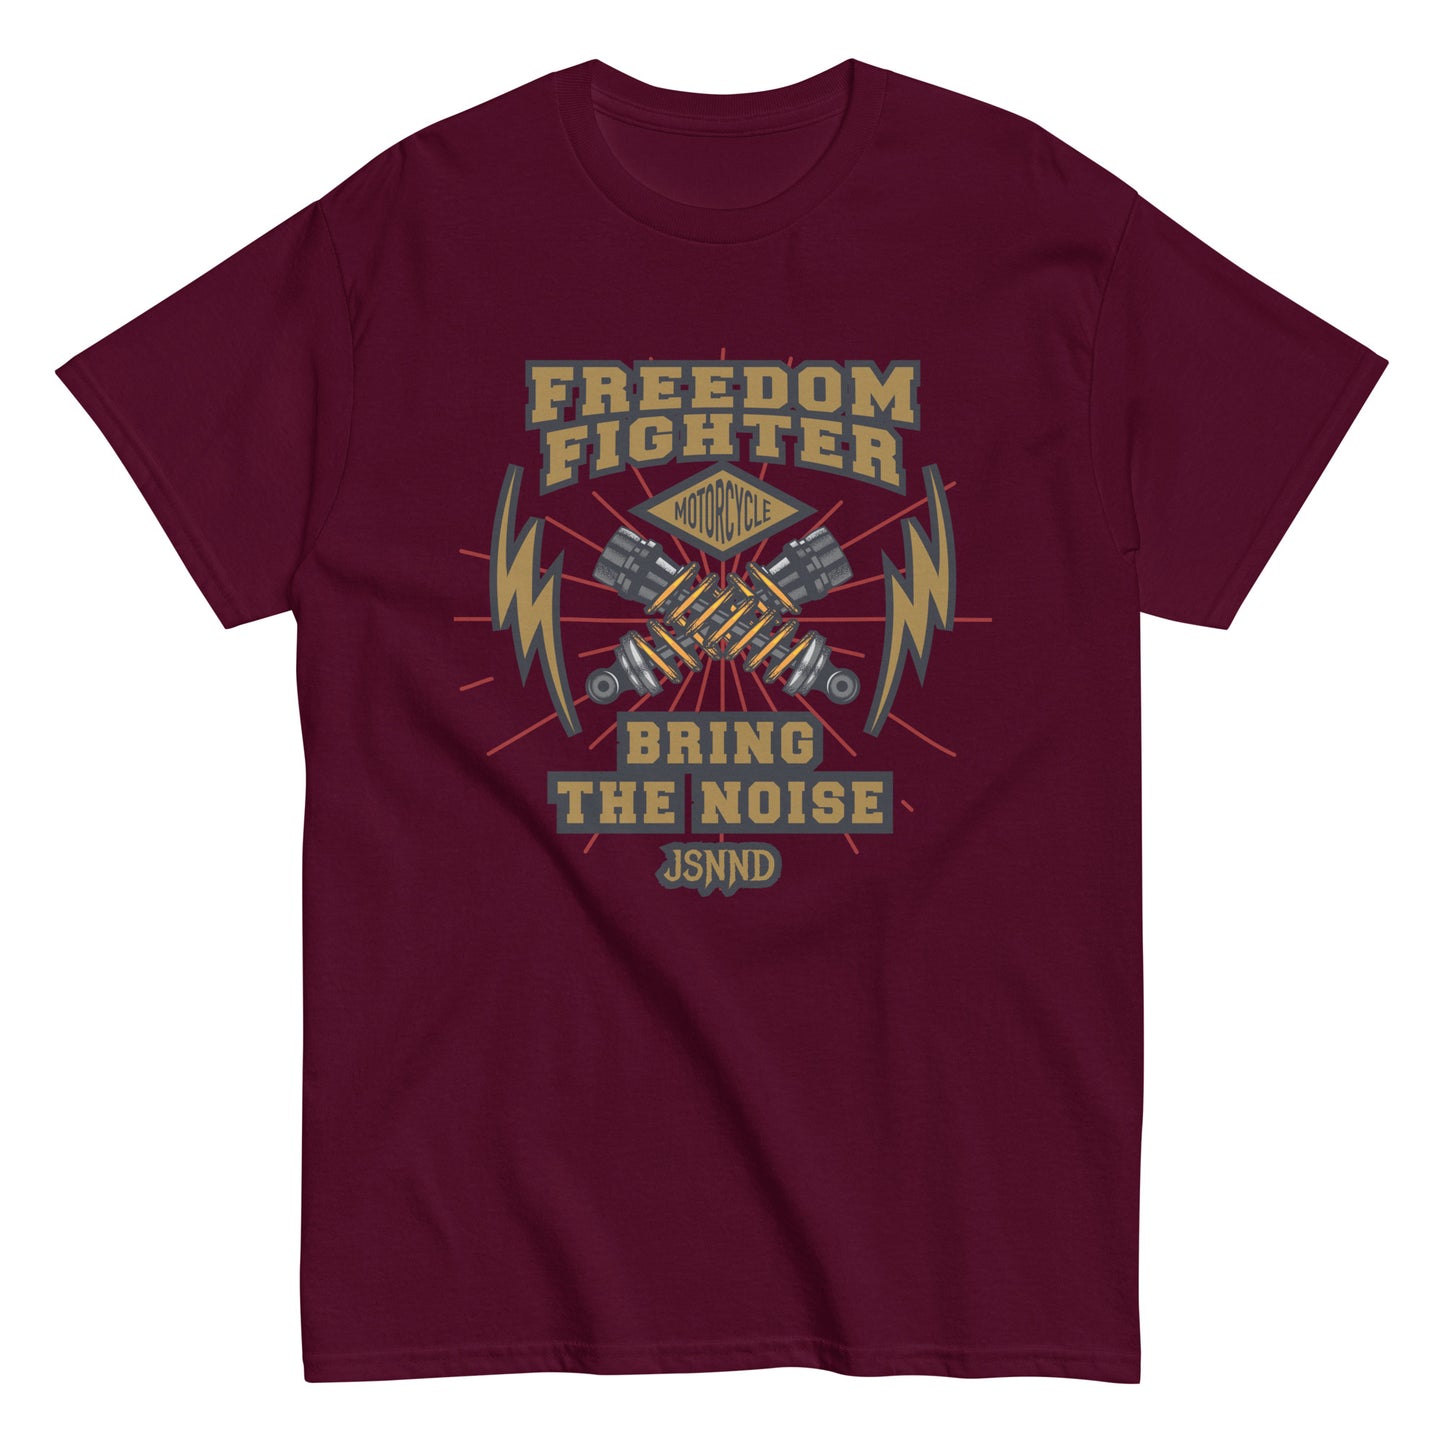 Freedom Fighter classic tee